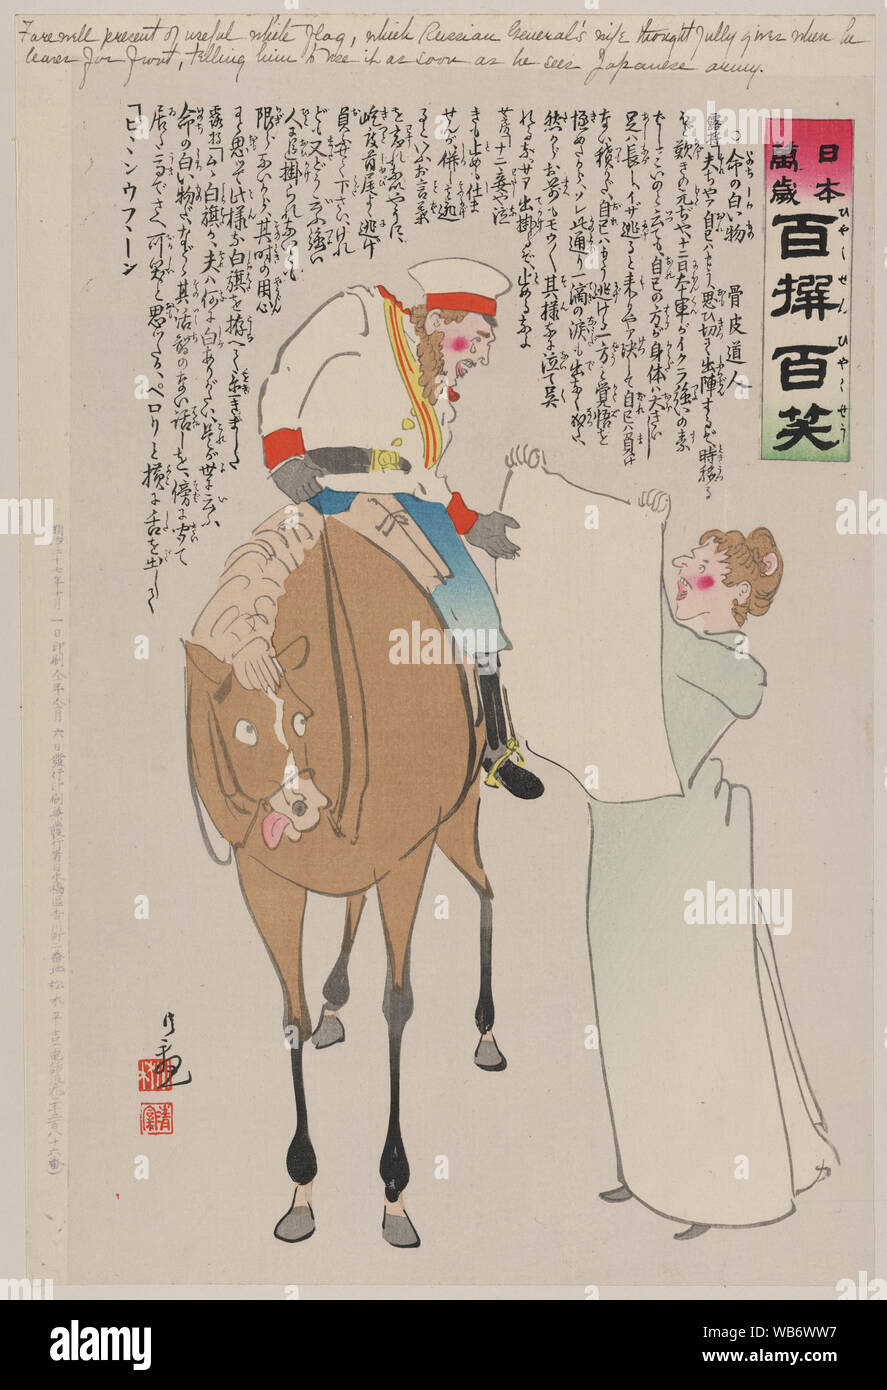 Farewell present of useful white flag, which Russian General's wife thoughtfully gives when he leaves for front, telling him to use it as soon as he sees Japanese army Abstract/medium: 1 print : woodcut, color ; 37.2 x 24.9 cm (sheet) Stock Photo